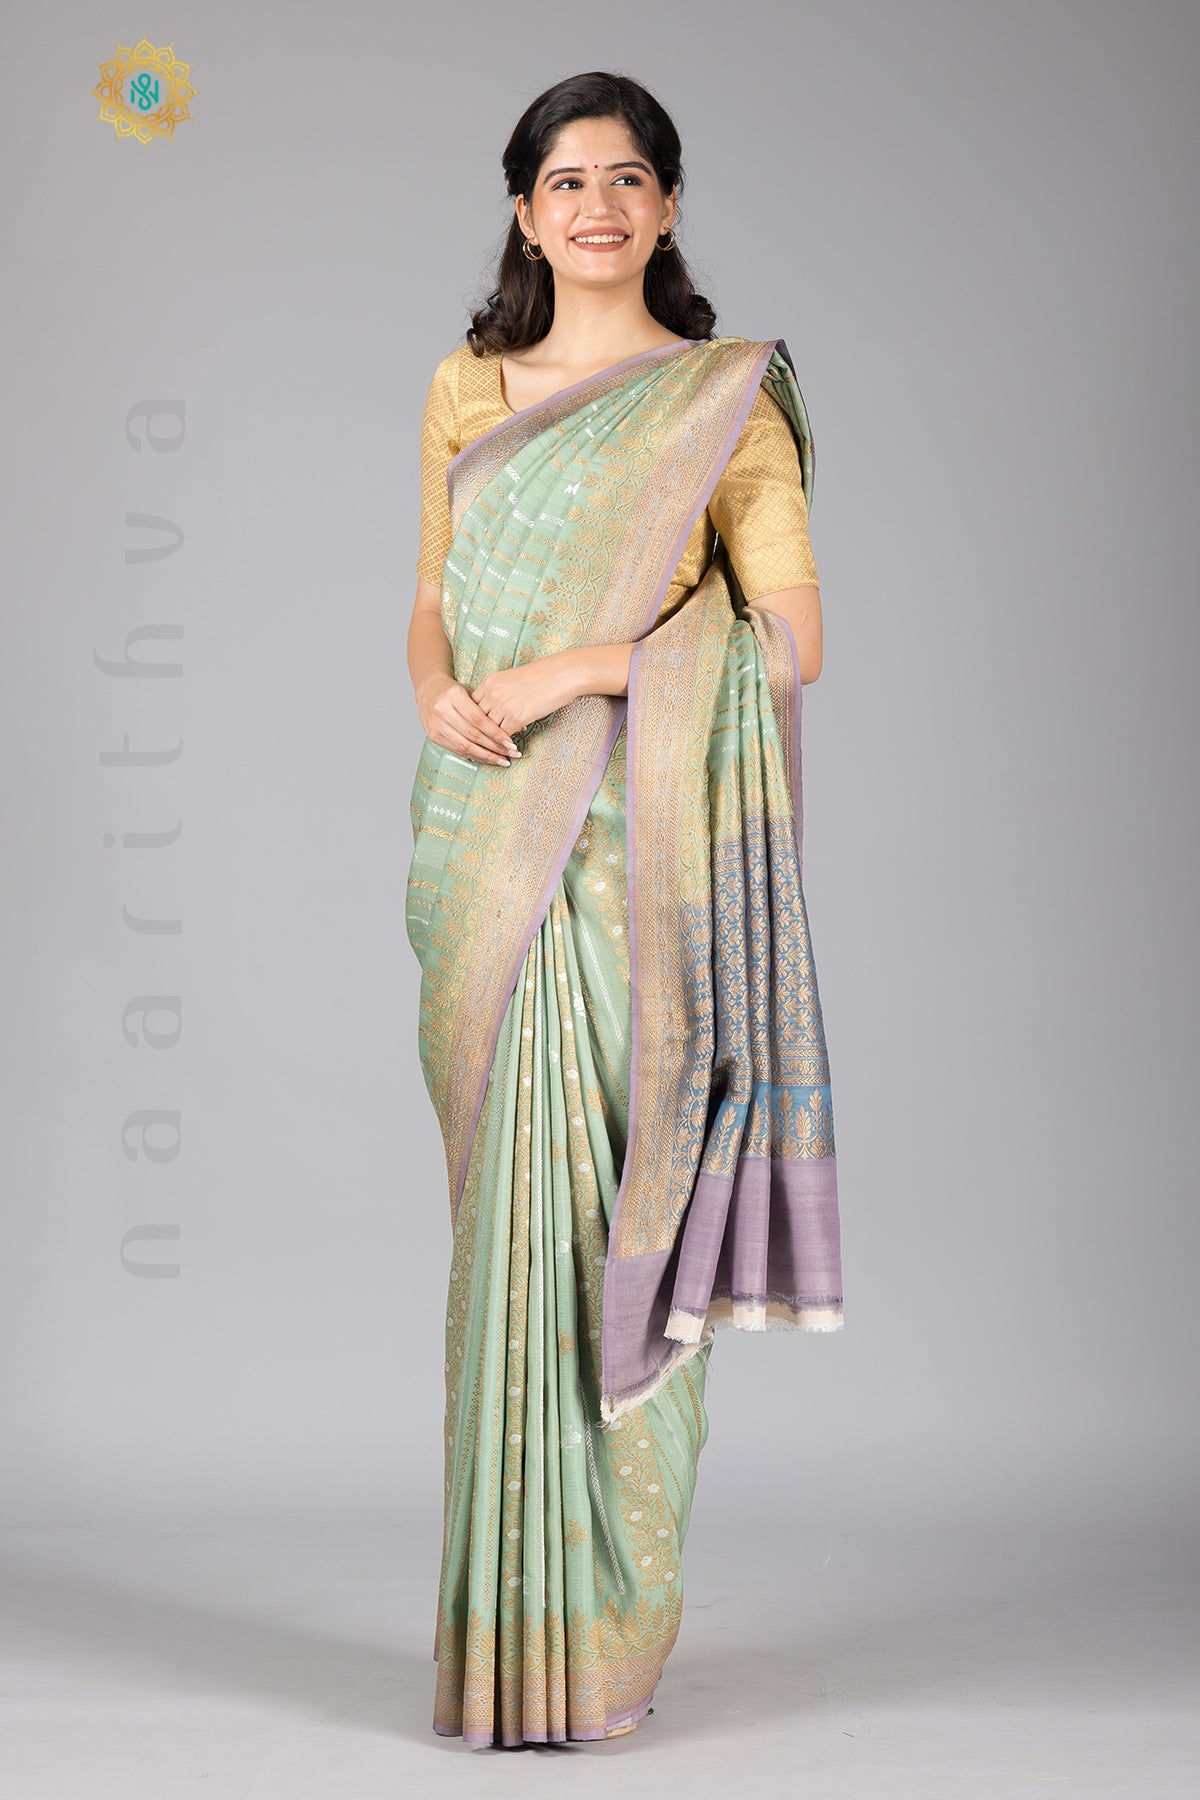 GREEN WITH LAVENDER - PURE HANDLOOM TUSSAR GEORGETTE WITH WATER ZARI WEAVES